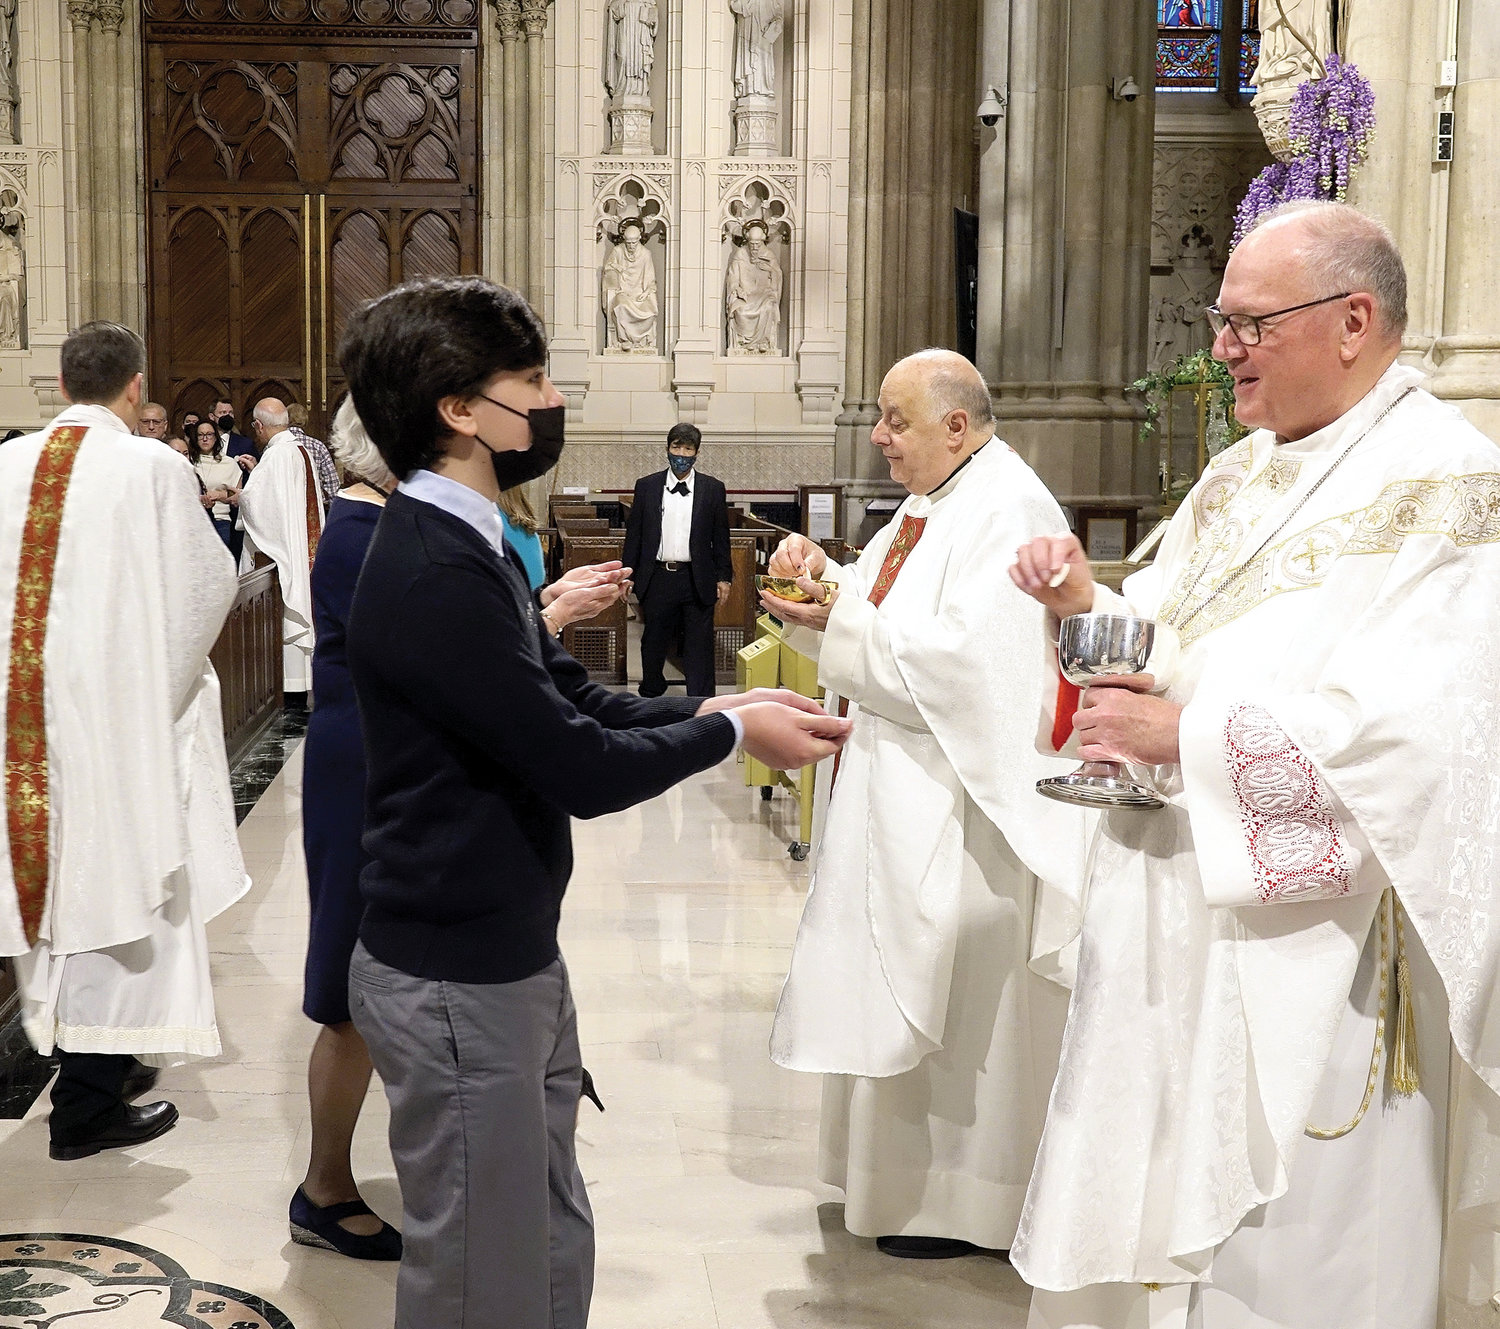 Cardinal Dolan and Msgr. Joseph LaMorte, vicar general and moderator of the curia in the archdiocese, distribute Communion at the Eighth-Grade Graduation Mass for Manhattan Region Catholic Schools in St. Patrick’s Cathedral on May 6.